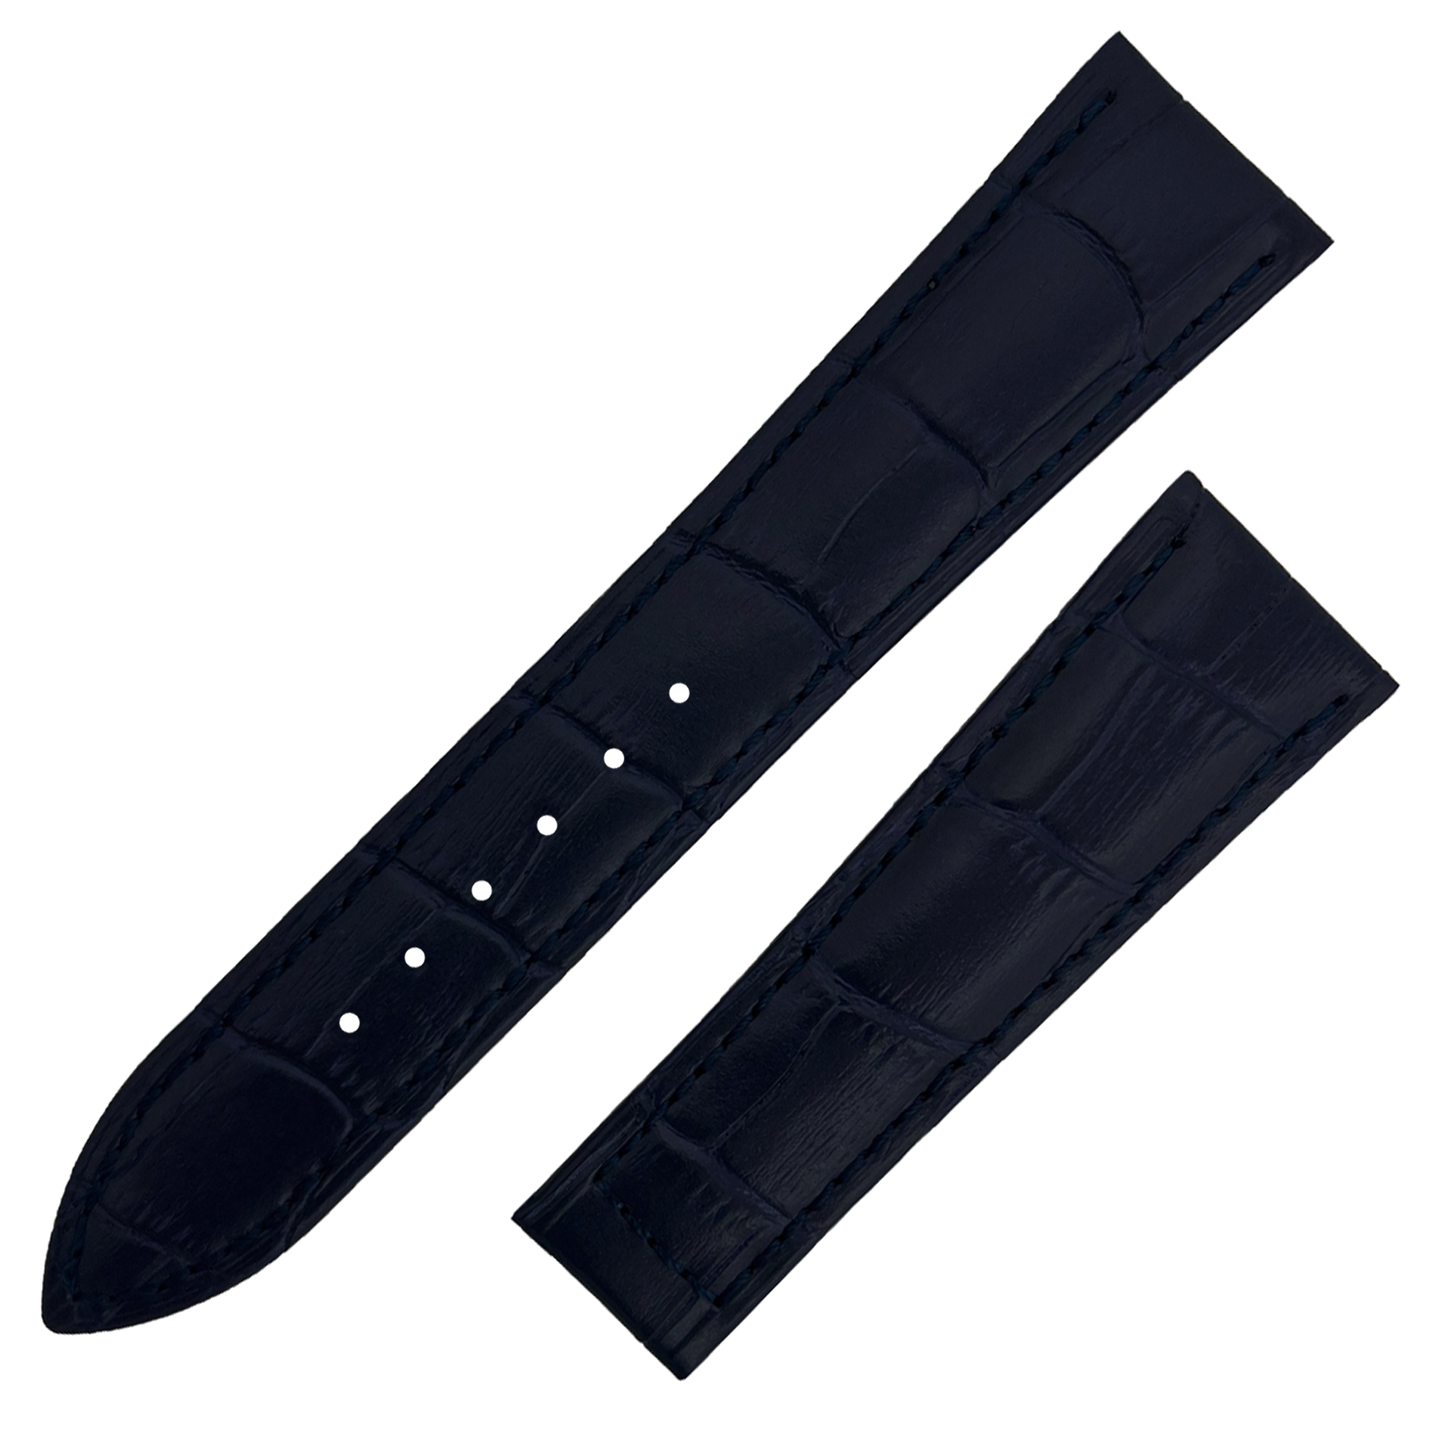 DBLACK [OMGDS1] 22MM LEATHER WATCH STRAP // COMPATIBLE FOR "OMEGA" WATCH MODELS